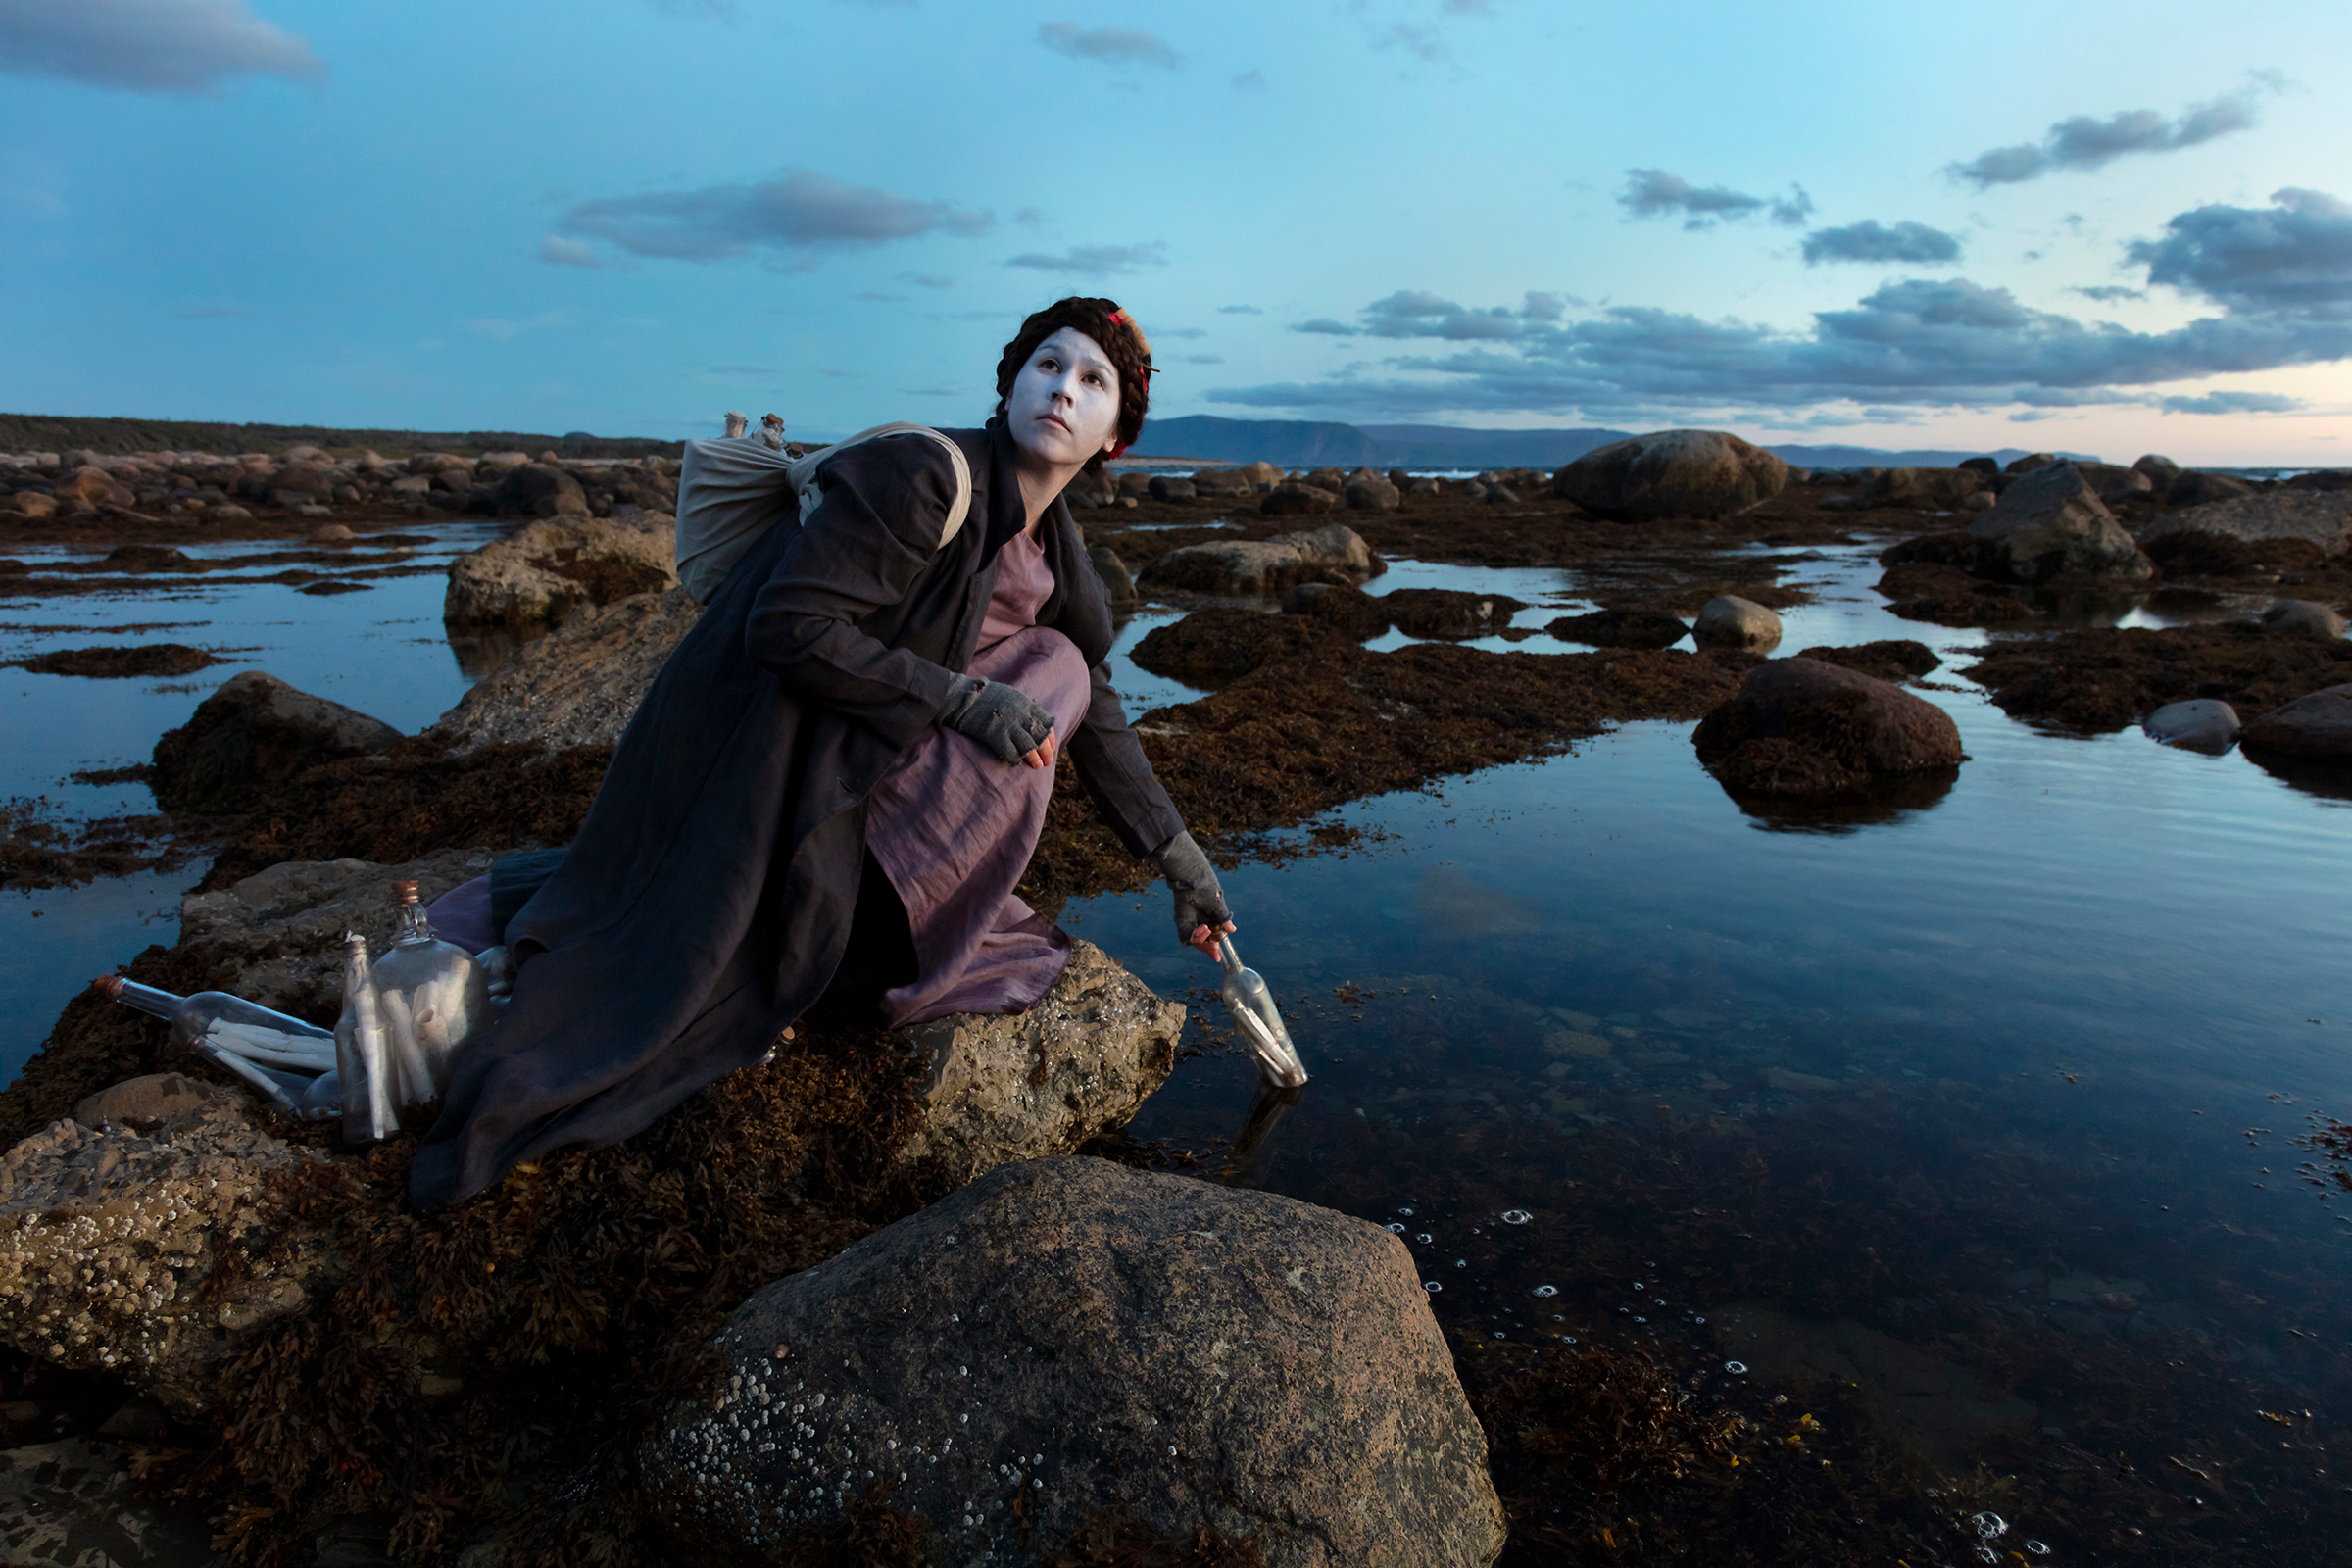     Meryl McMaster, Ordovician Tide I, 2019. From the series As Immense as the Sky. Courtesy of the artist, Stephen Bulger Gallery and Pierre-François Ouellette art contemporain.

